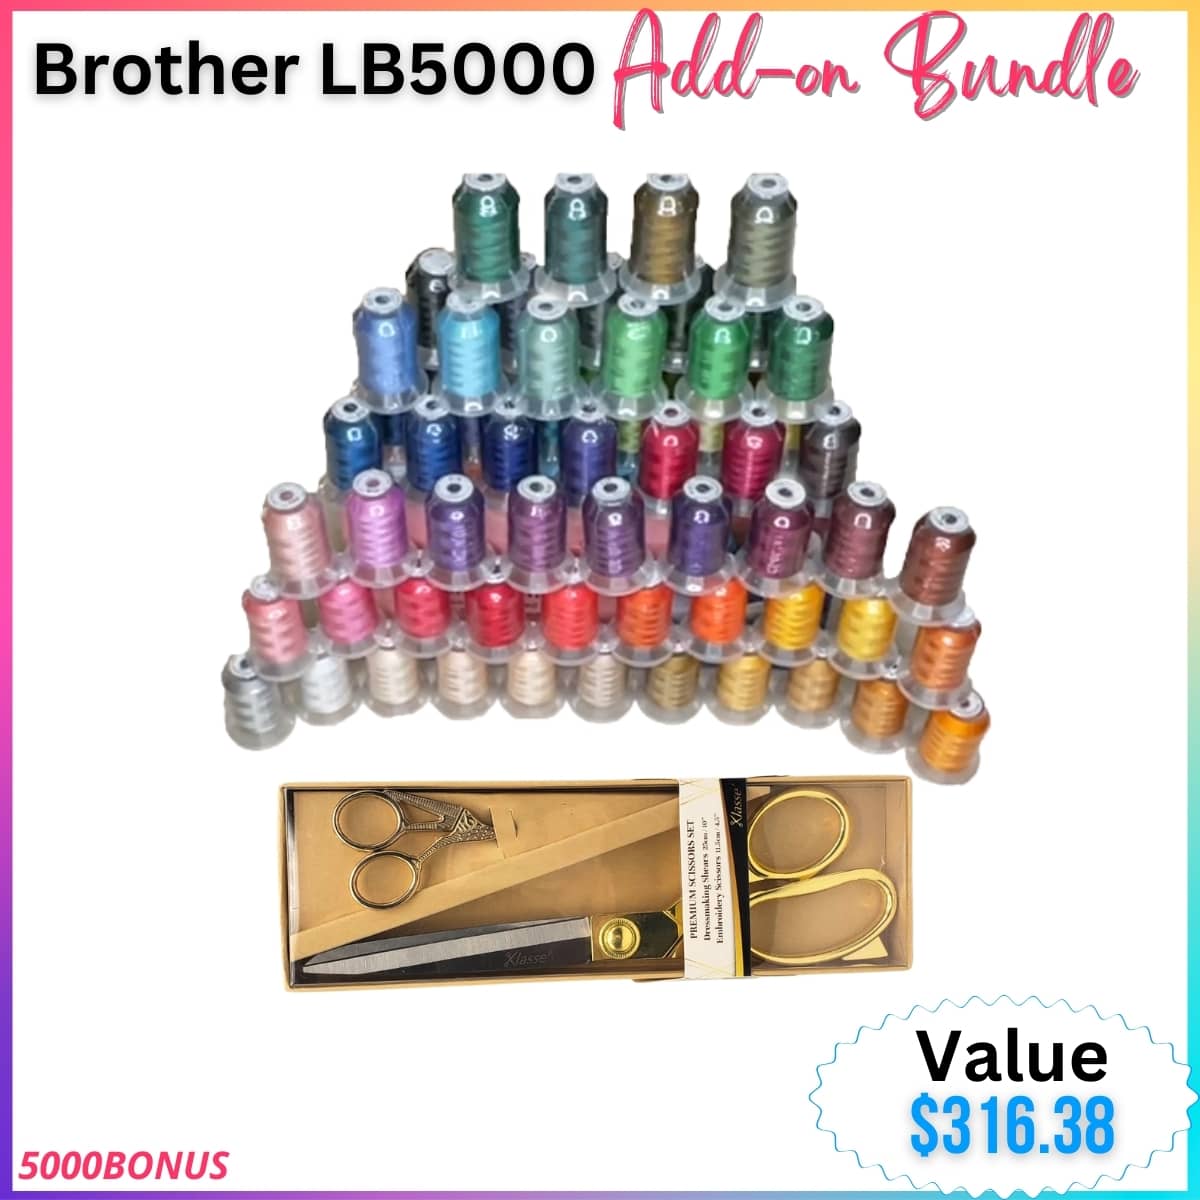 Brother LB5000 Sewing and Embrodery Machine